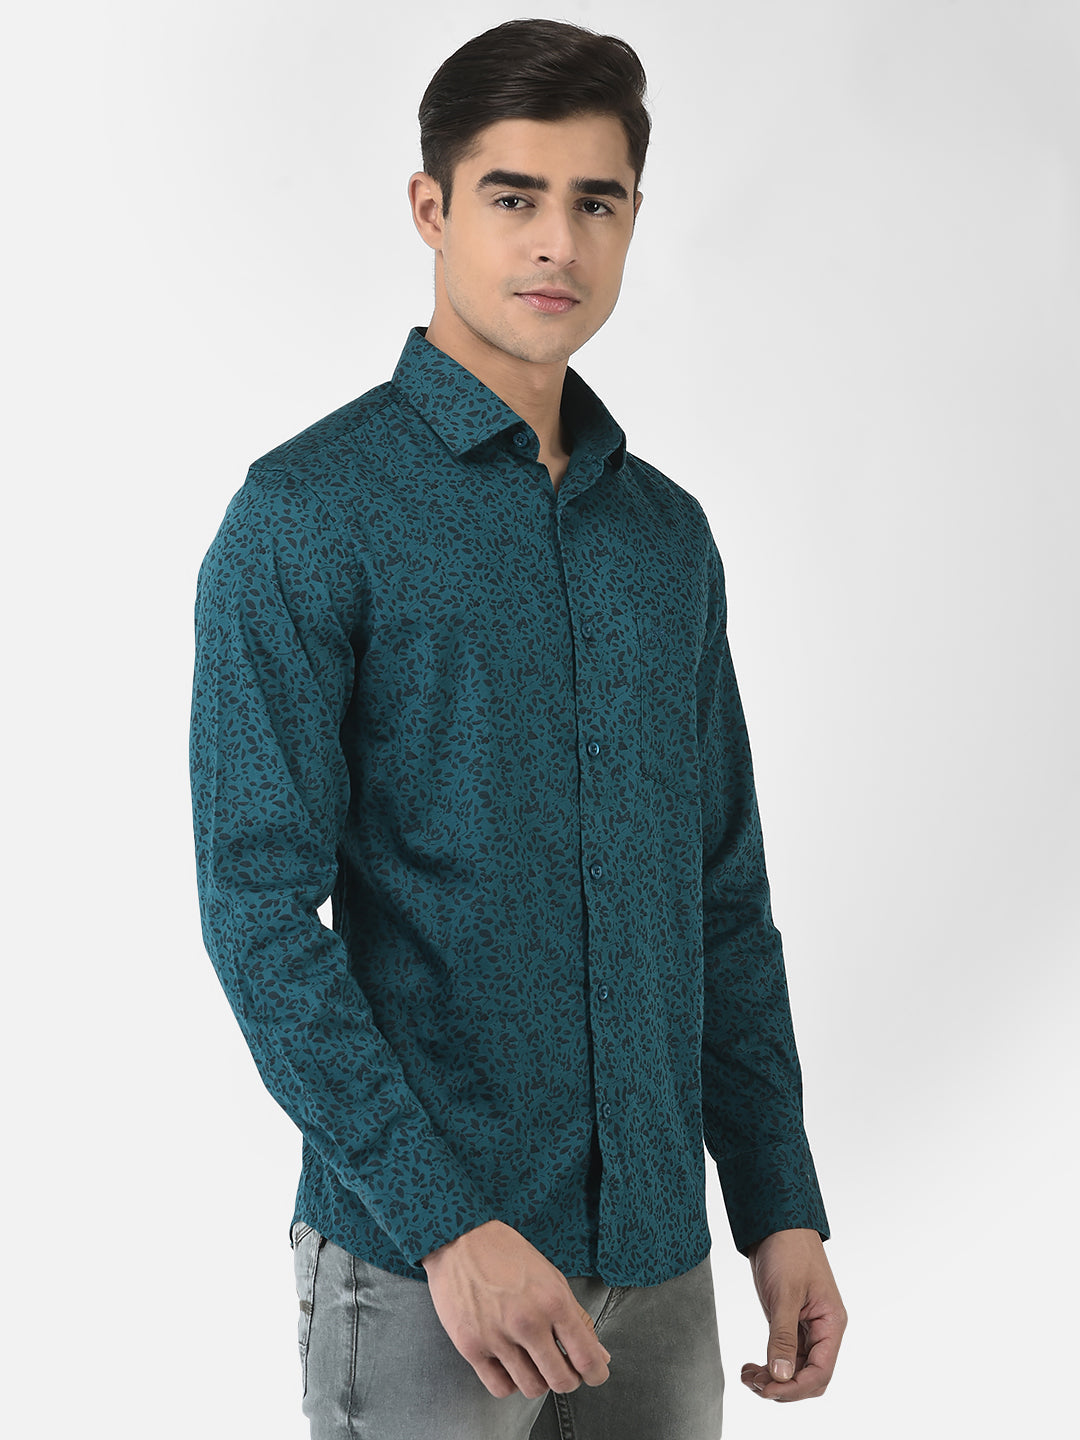  Teal Blue Shirt in Floral Print